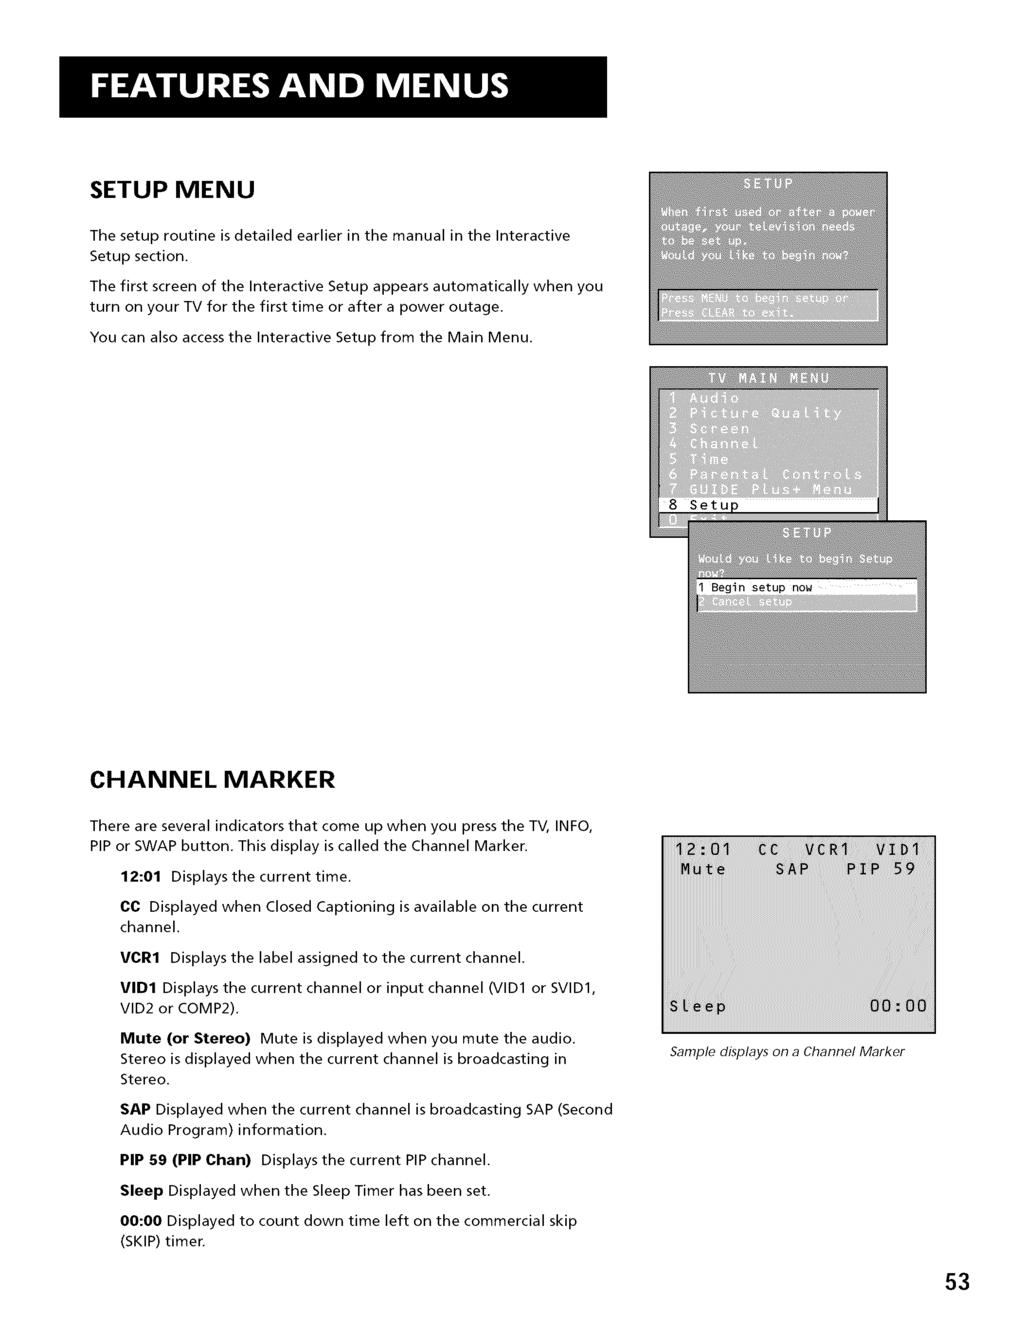 SETUP MENU The setup routine is detailed earlier in the manual in the Interactive Setup section.